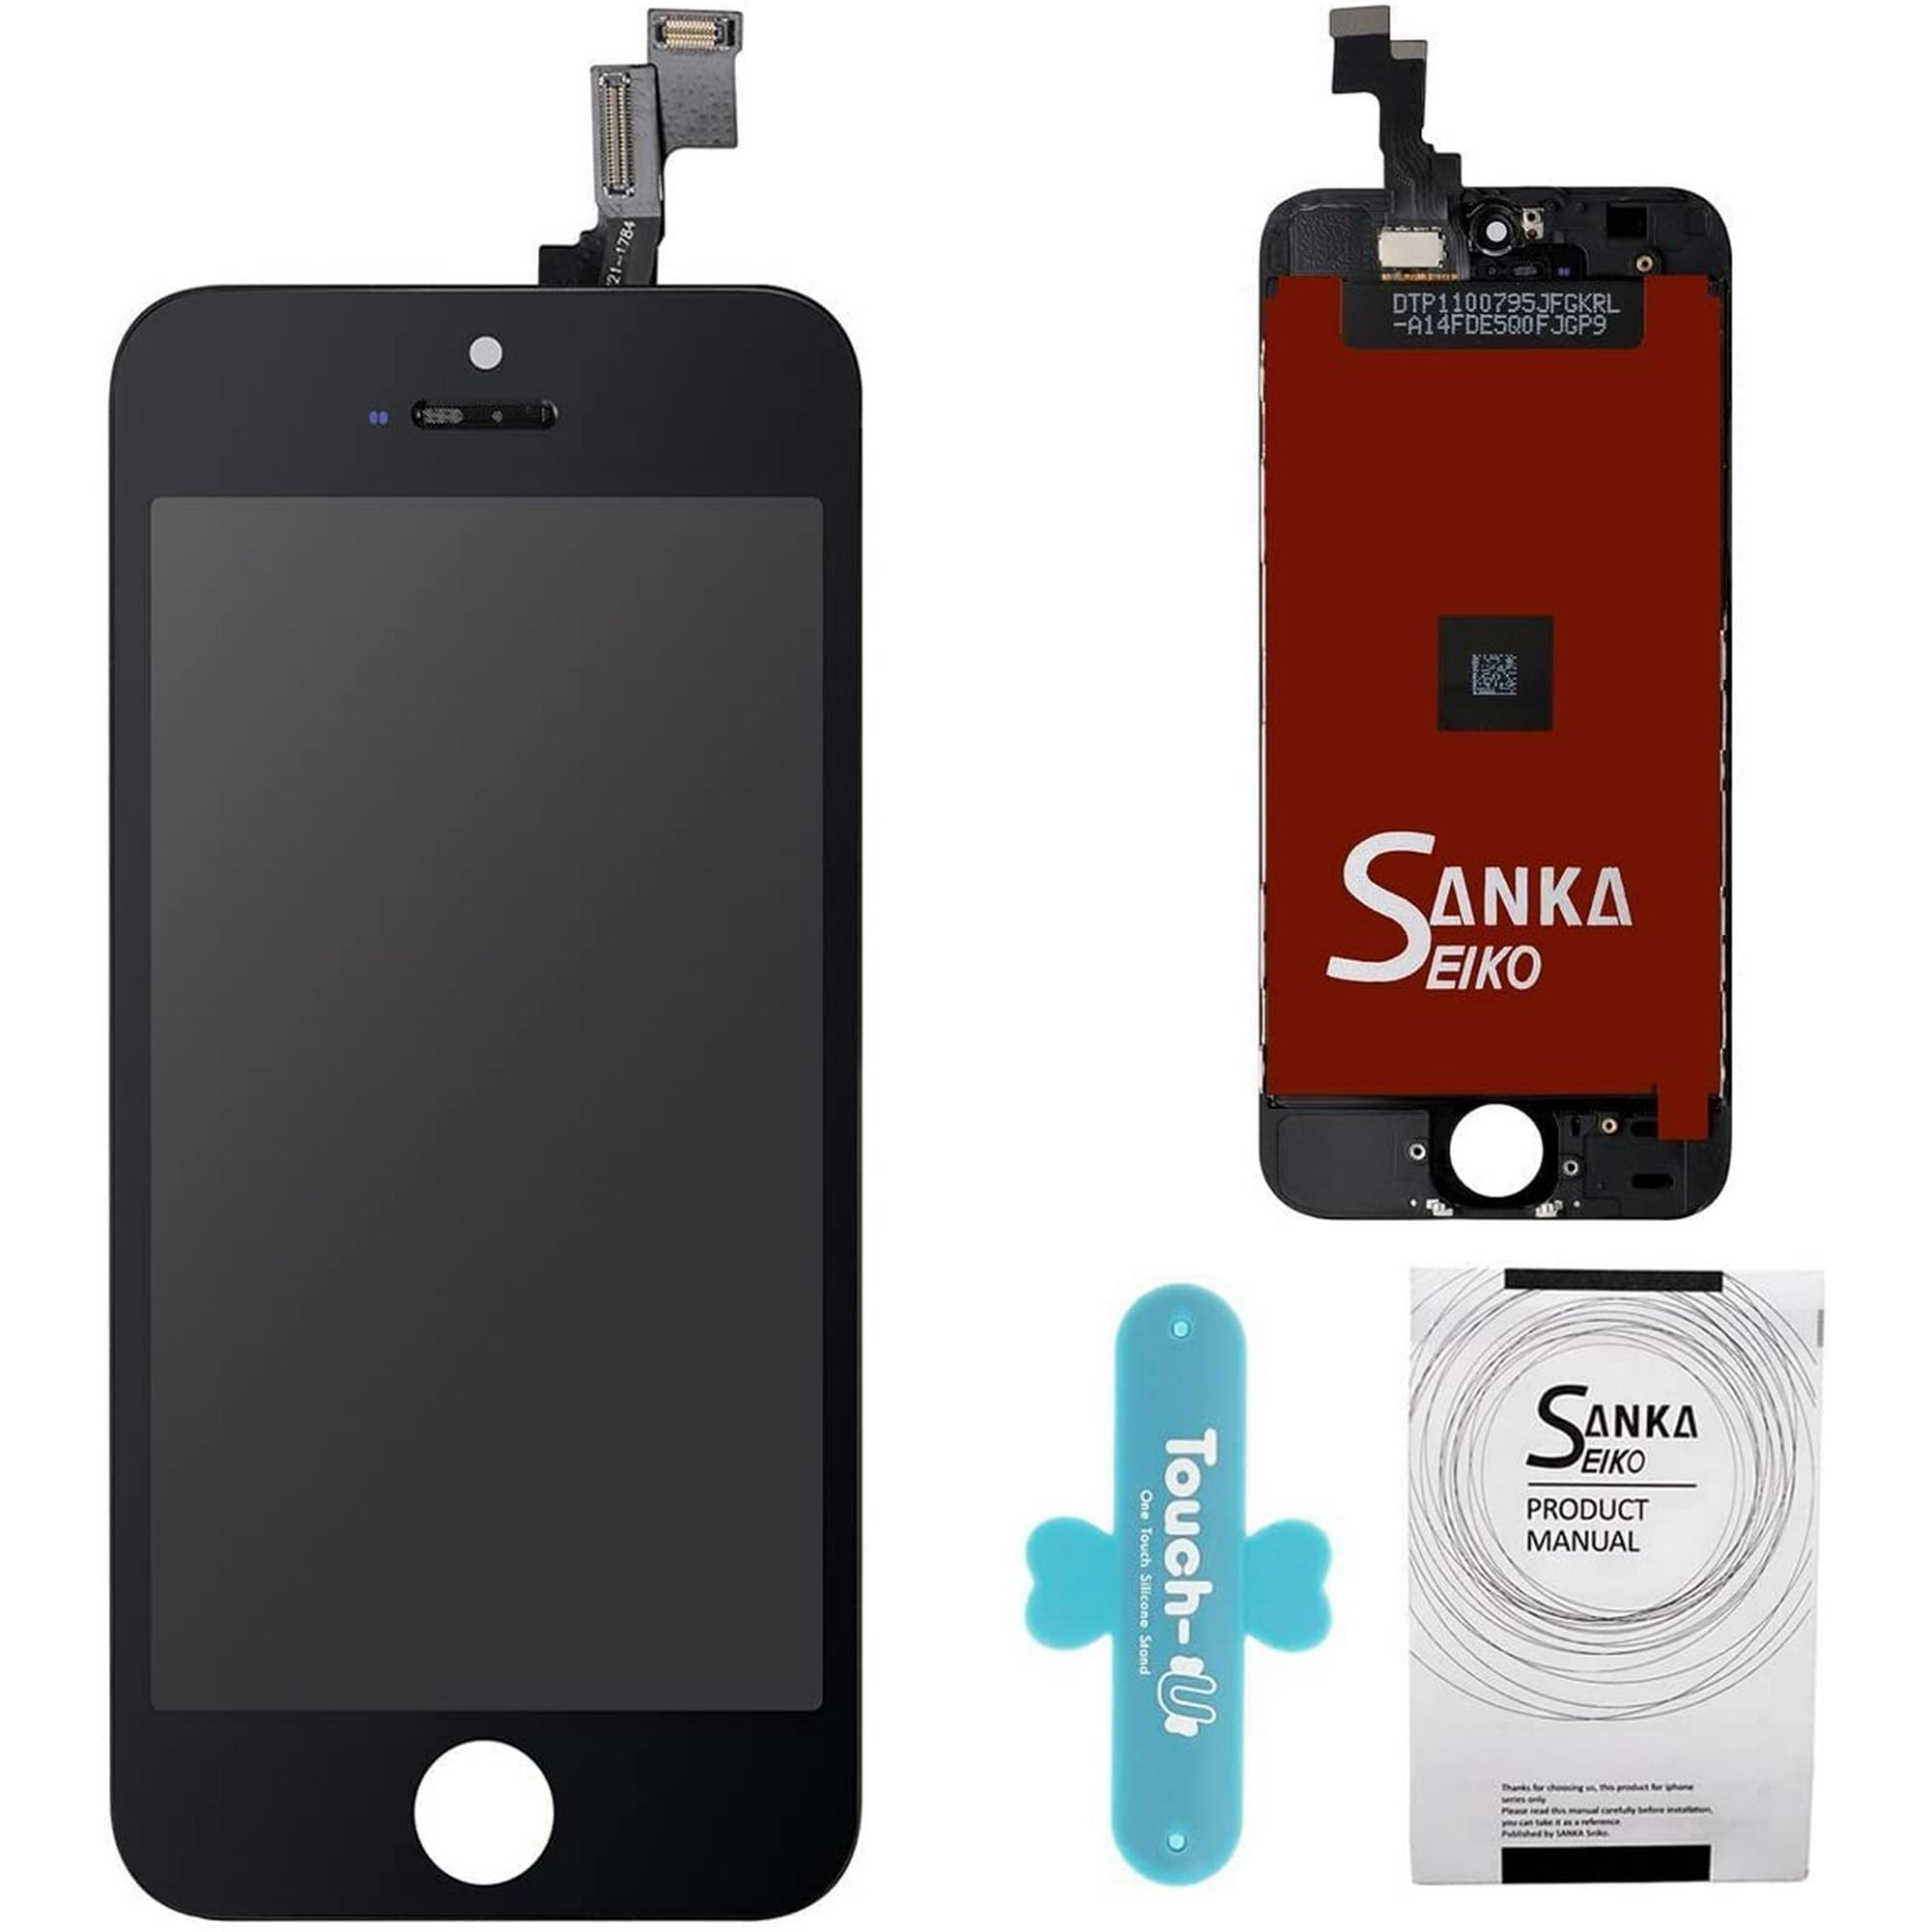 SANKA iPhone 5S LCD Screen Replacement Digitizer Display Retina Touch  Screen Glass Frame Assembly for iPhone 5S - Black | Walmart Canada